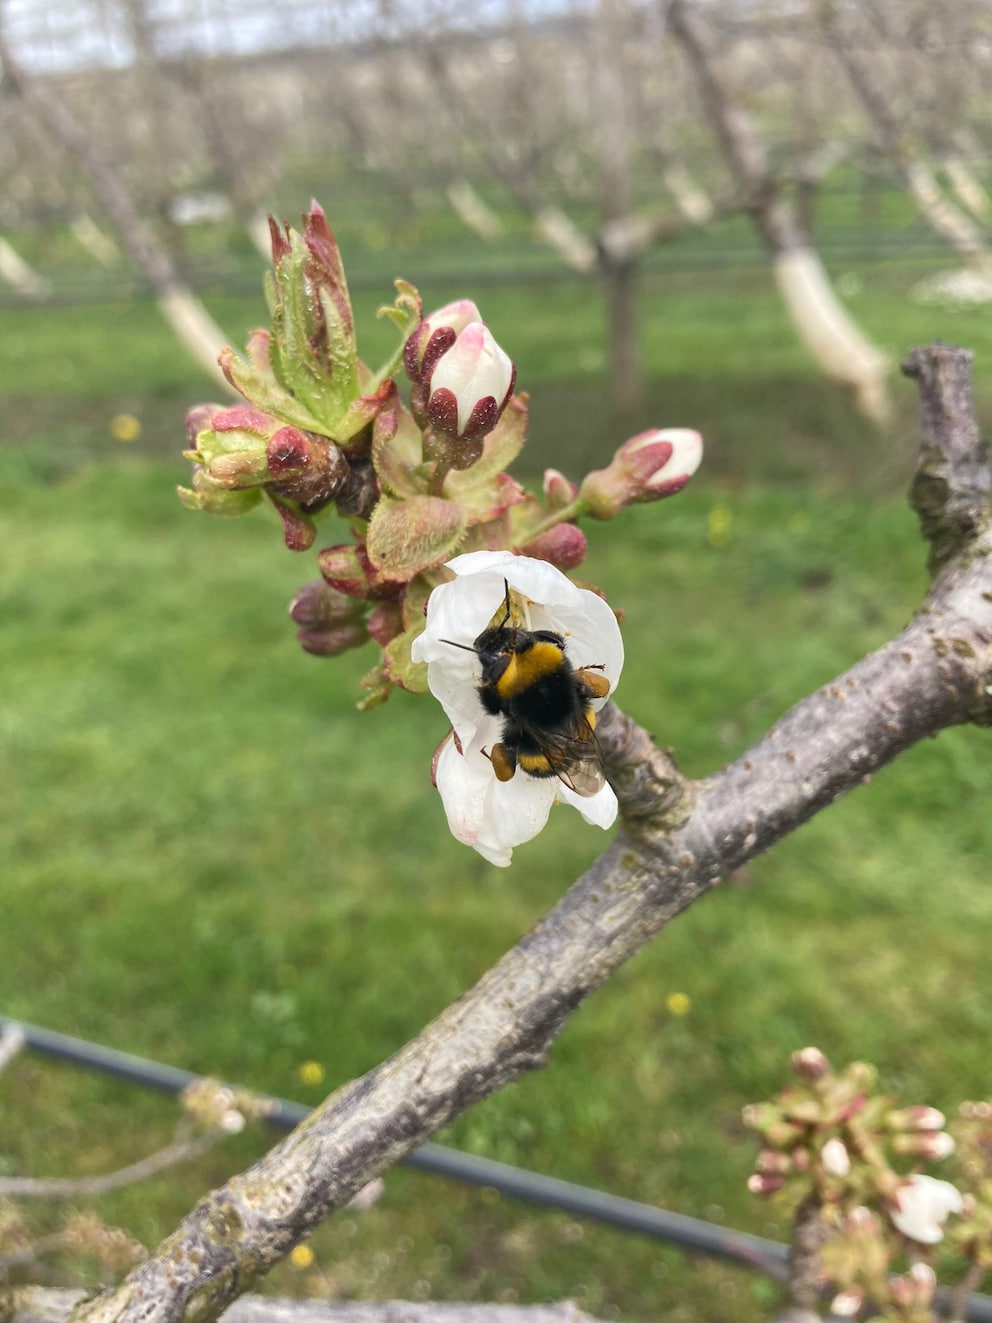 A mere day after frost night and the first bees are already out pollinating the flowers.